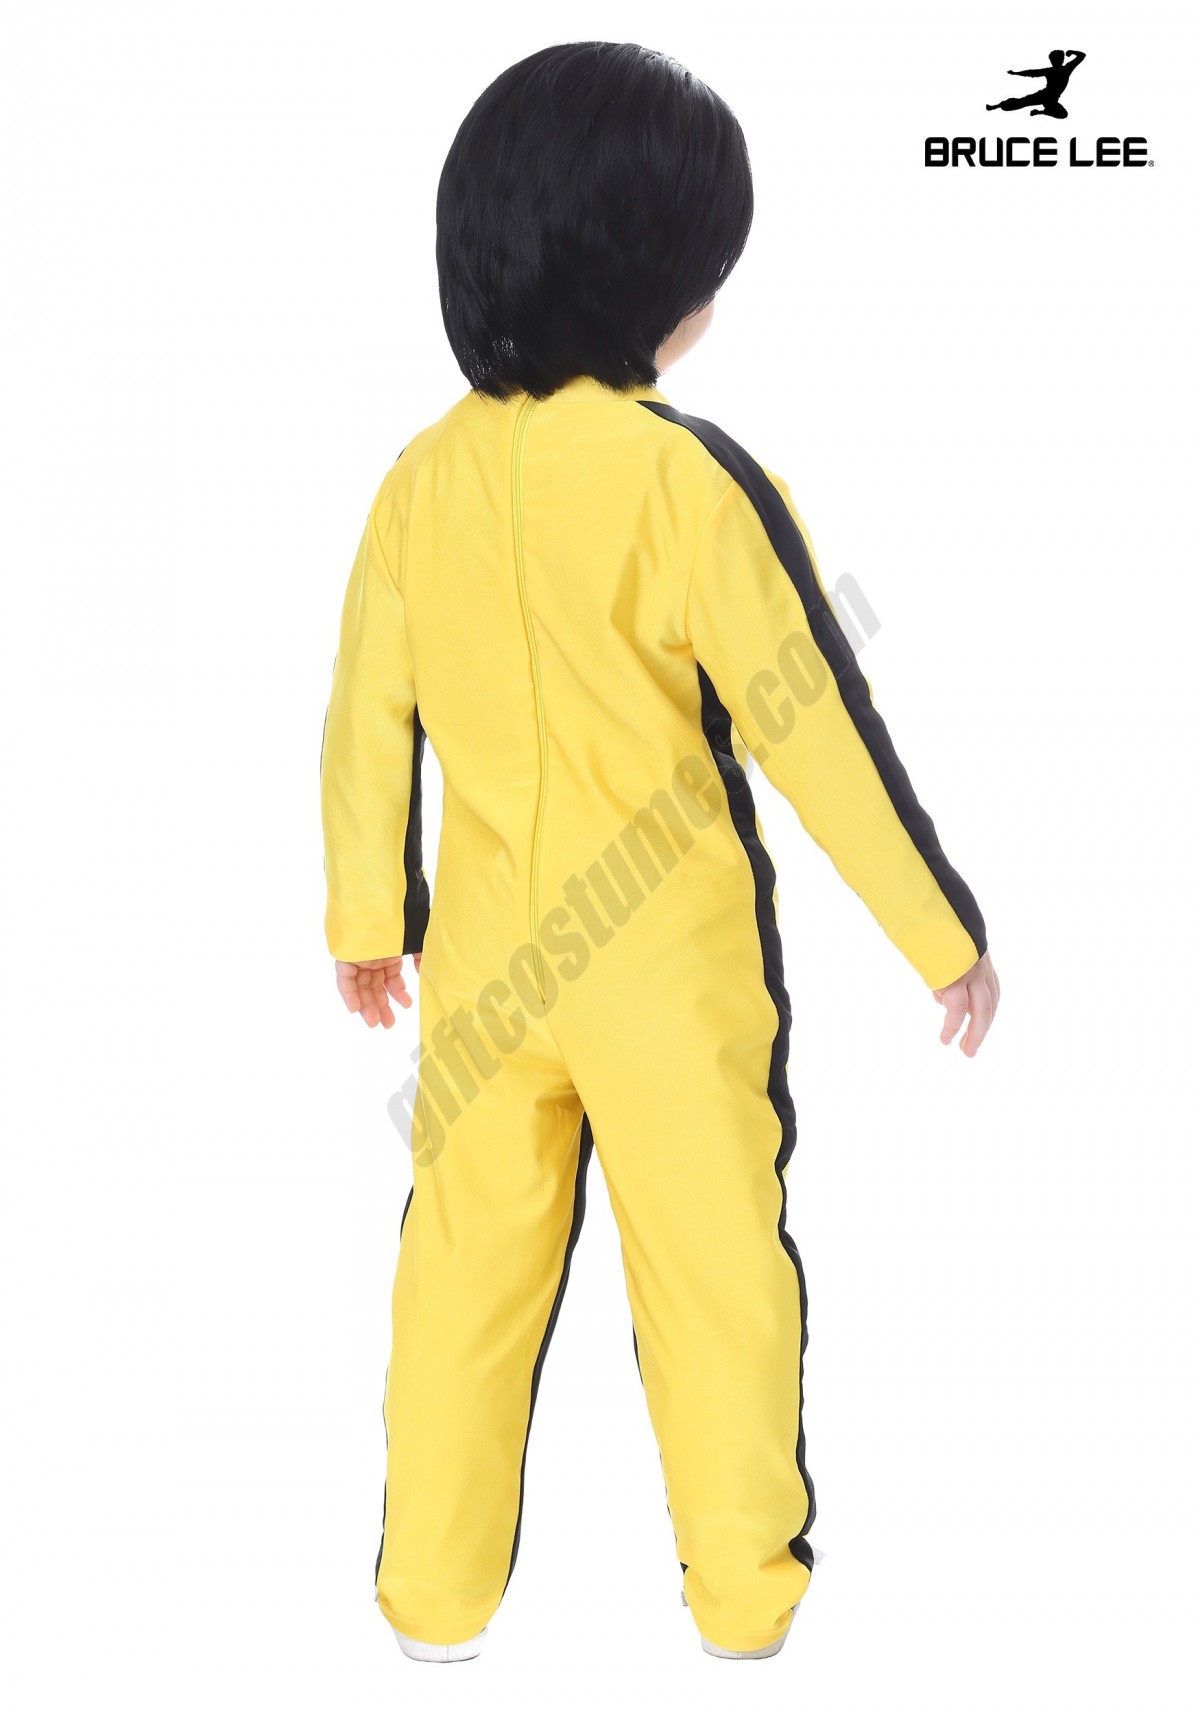 Bruce Lee Toddler Costume Promotions - -1